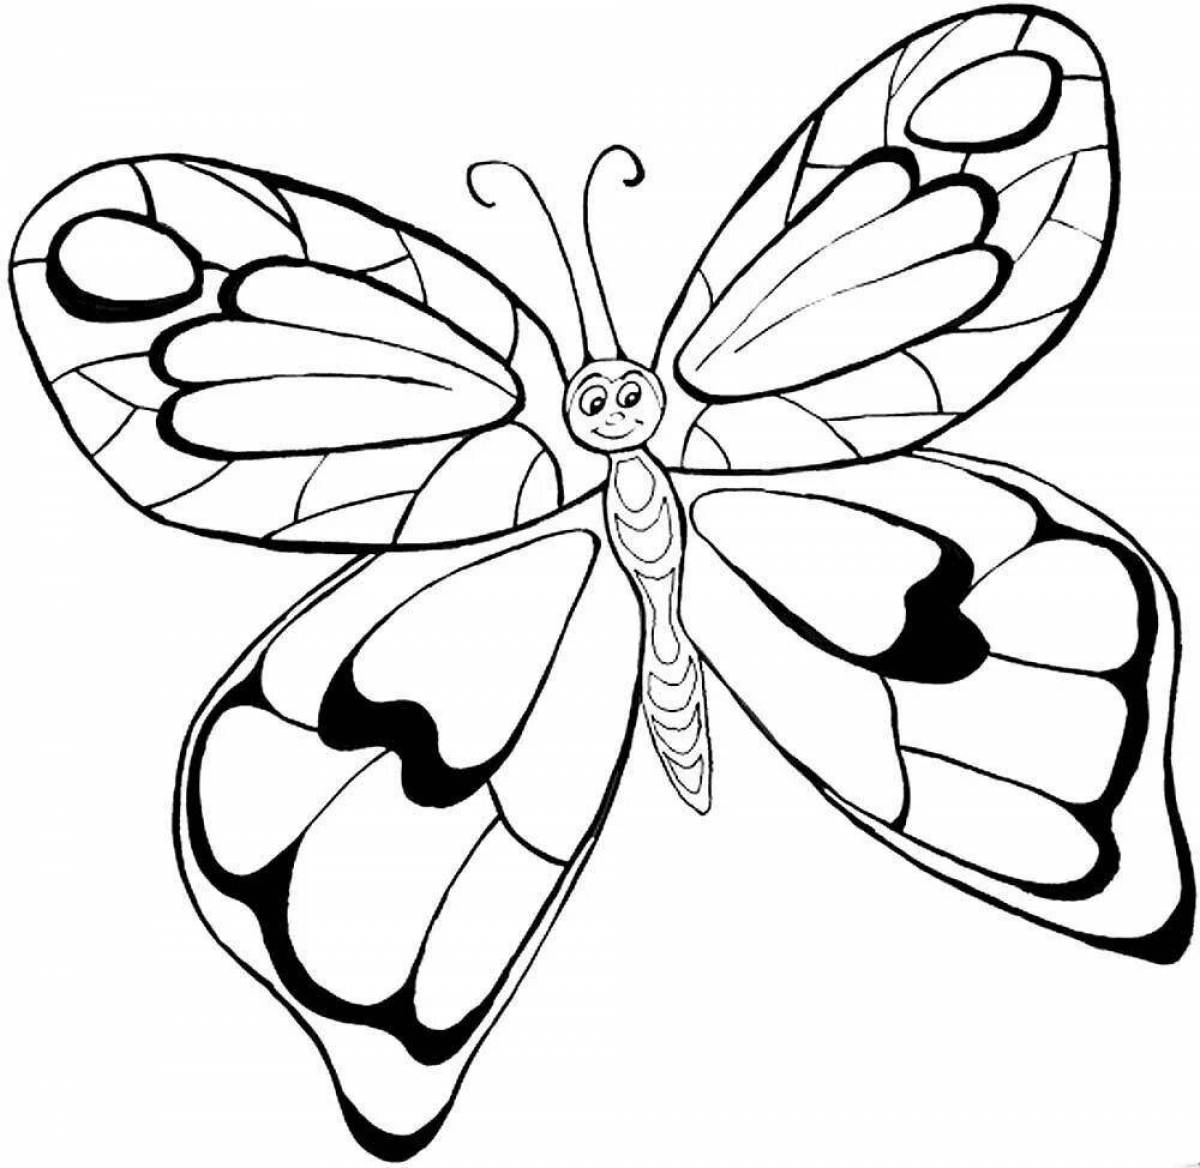 Exotic butterfly coloring book for kids